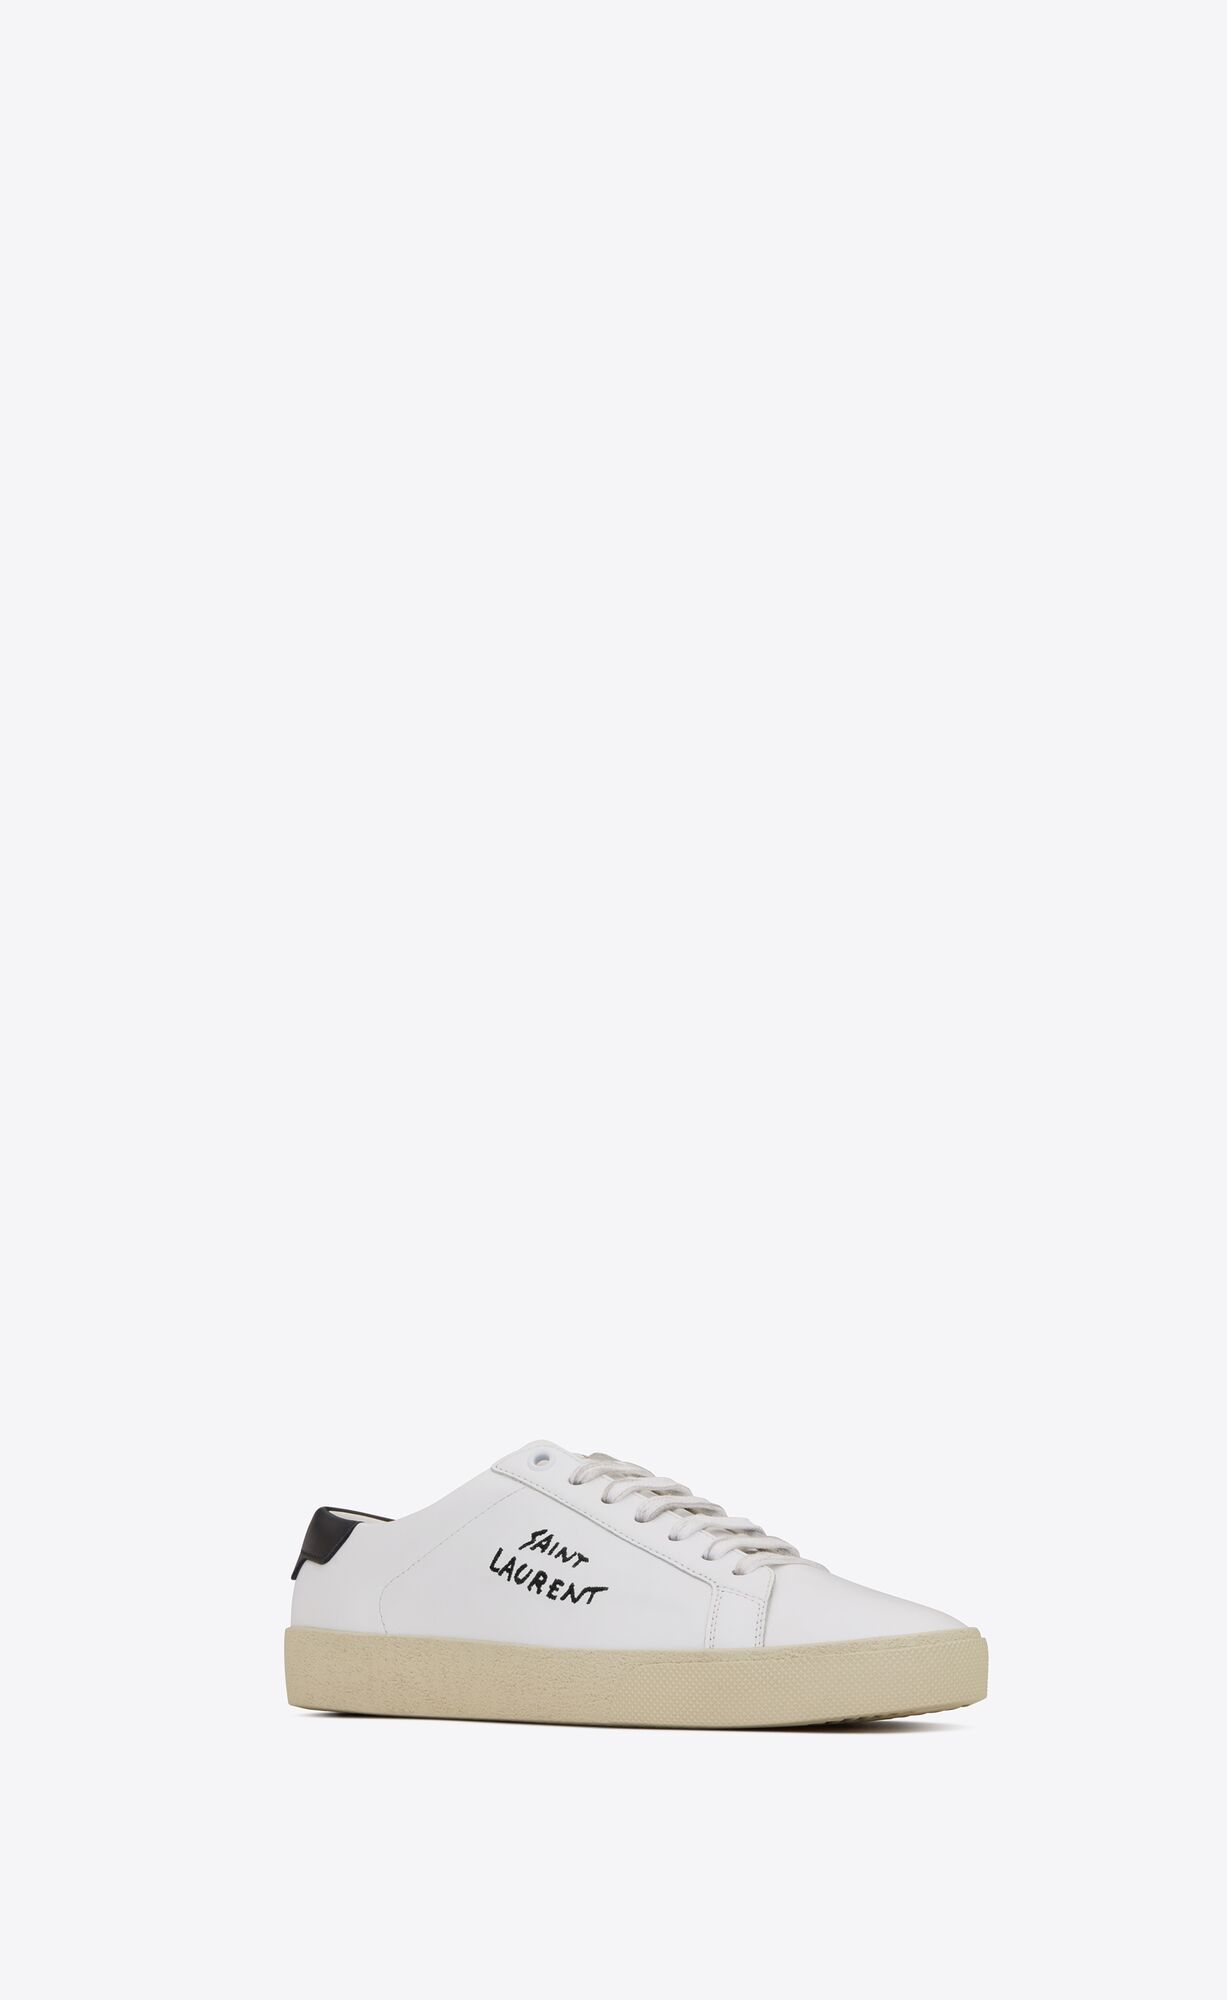 Court classic sl/06 embroidered sneakers in leather | Saint Laurent ...